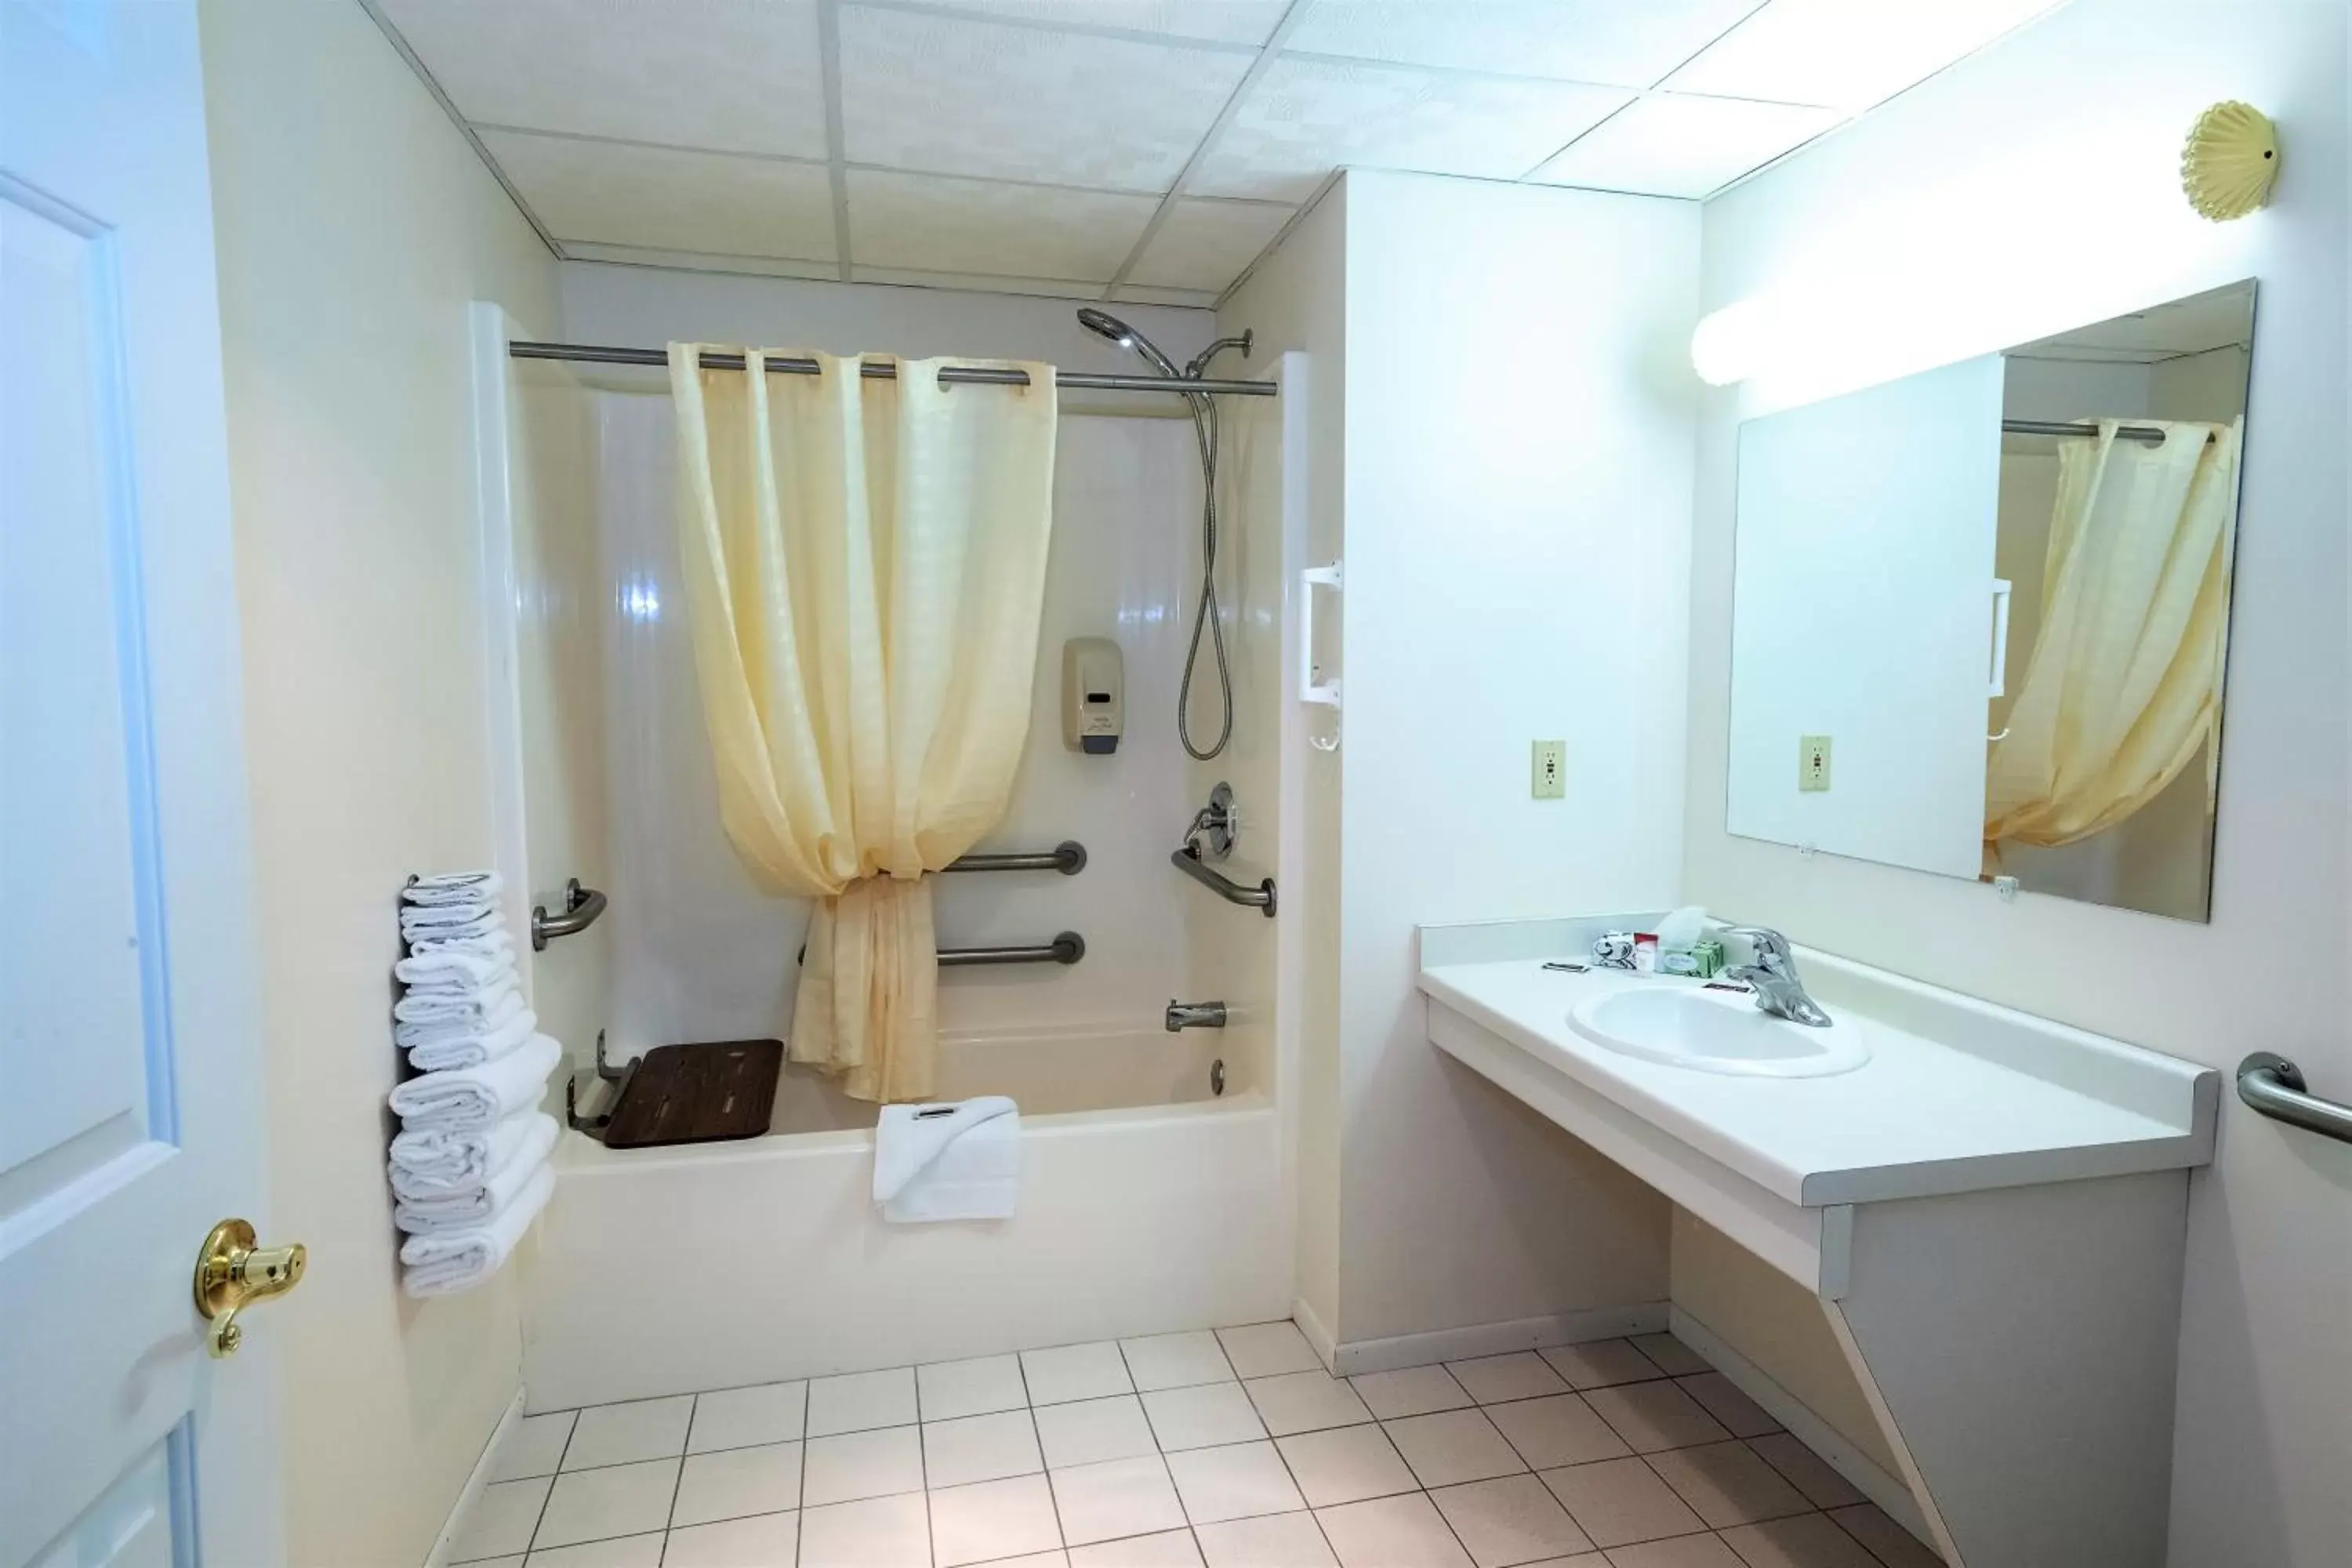 Facility for disabled guests, Bathroom in Mountain Host Motor Inn